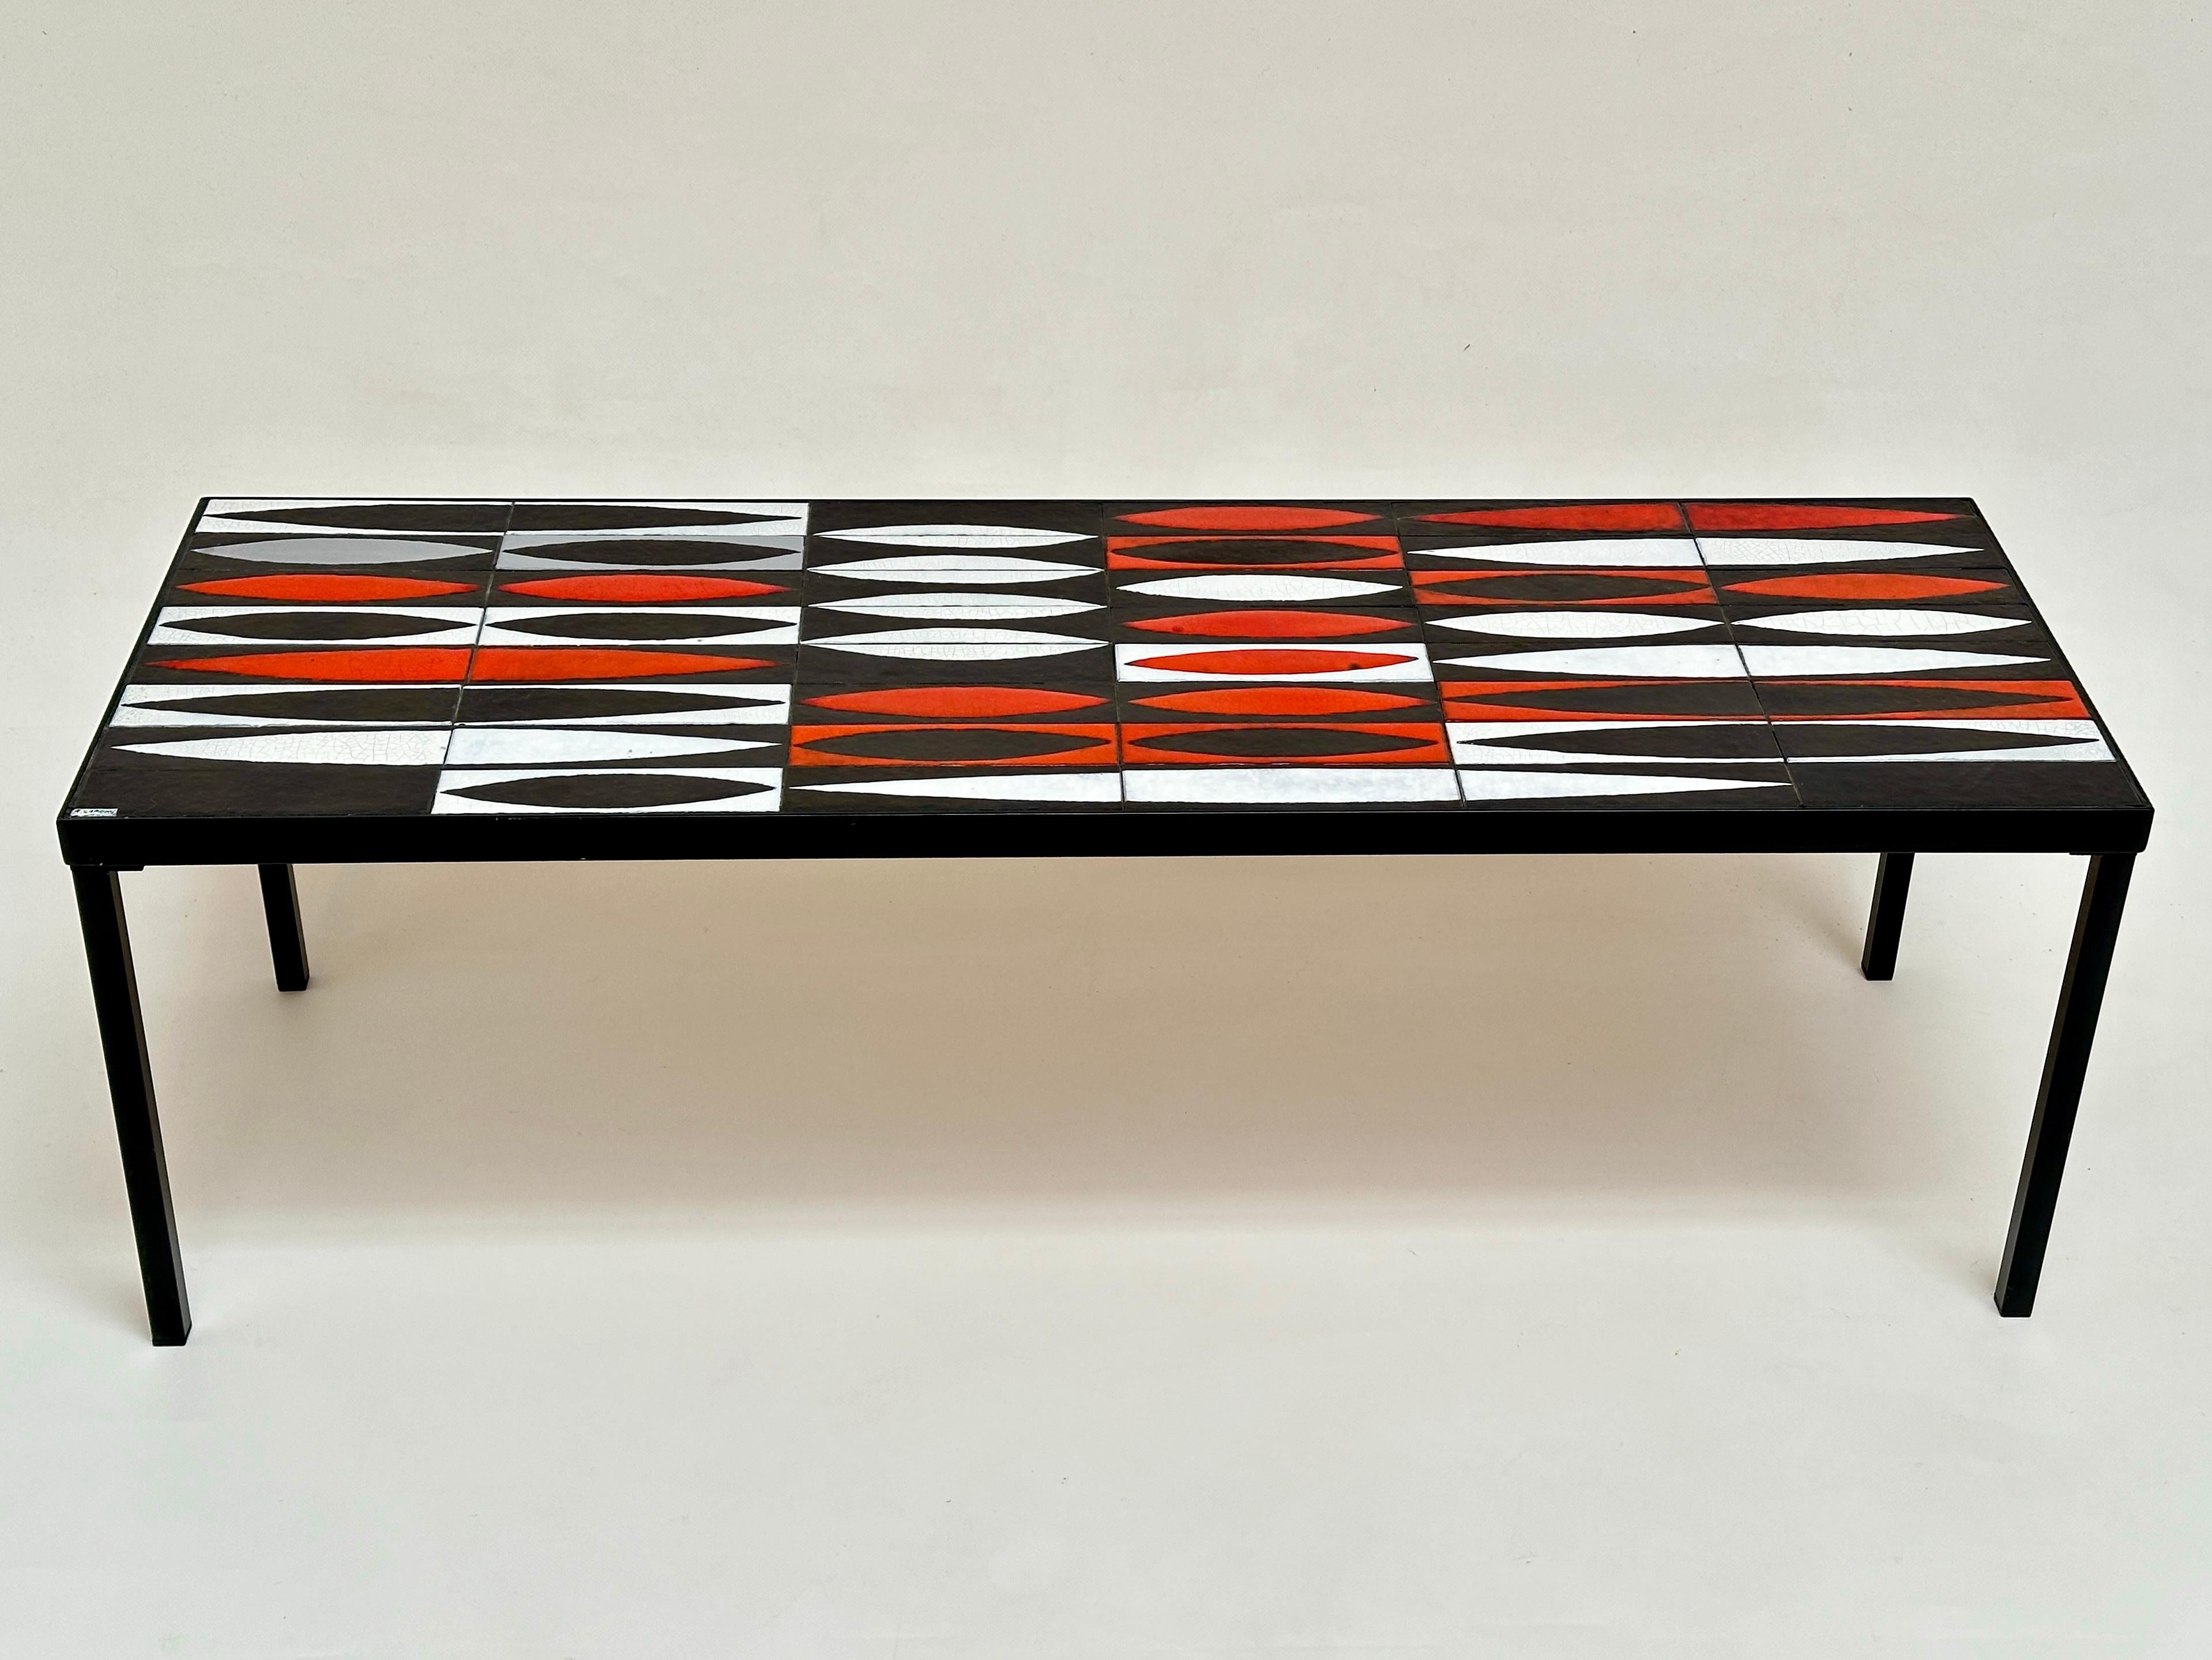 Ceramic Iconic Navettes Low Table, Roger Capron, Vallauris c. 1960 For Sale